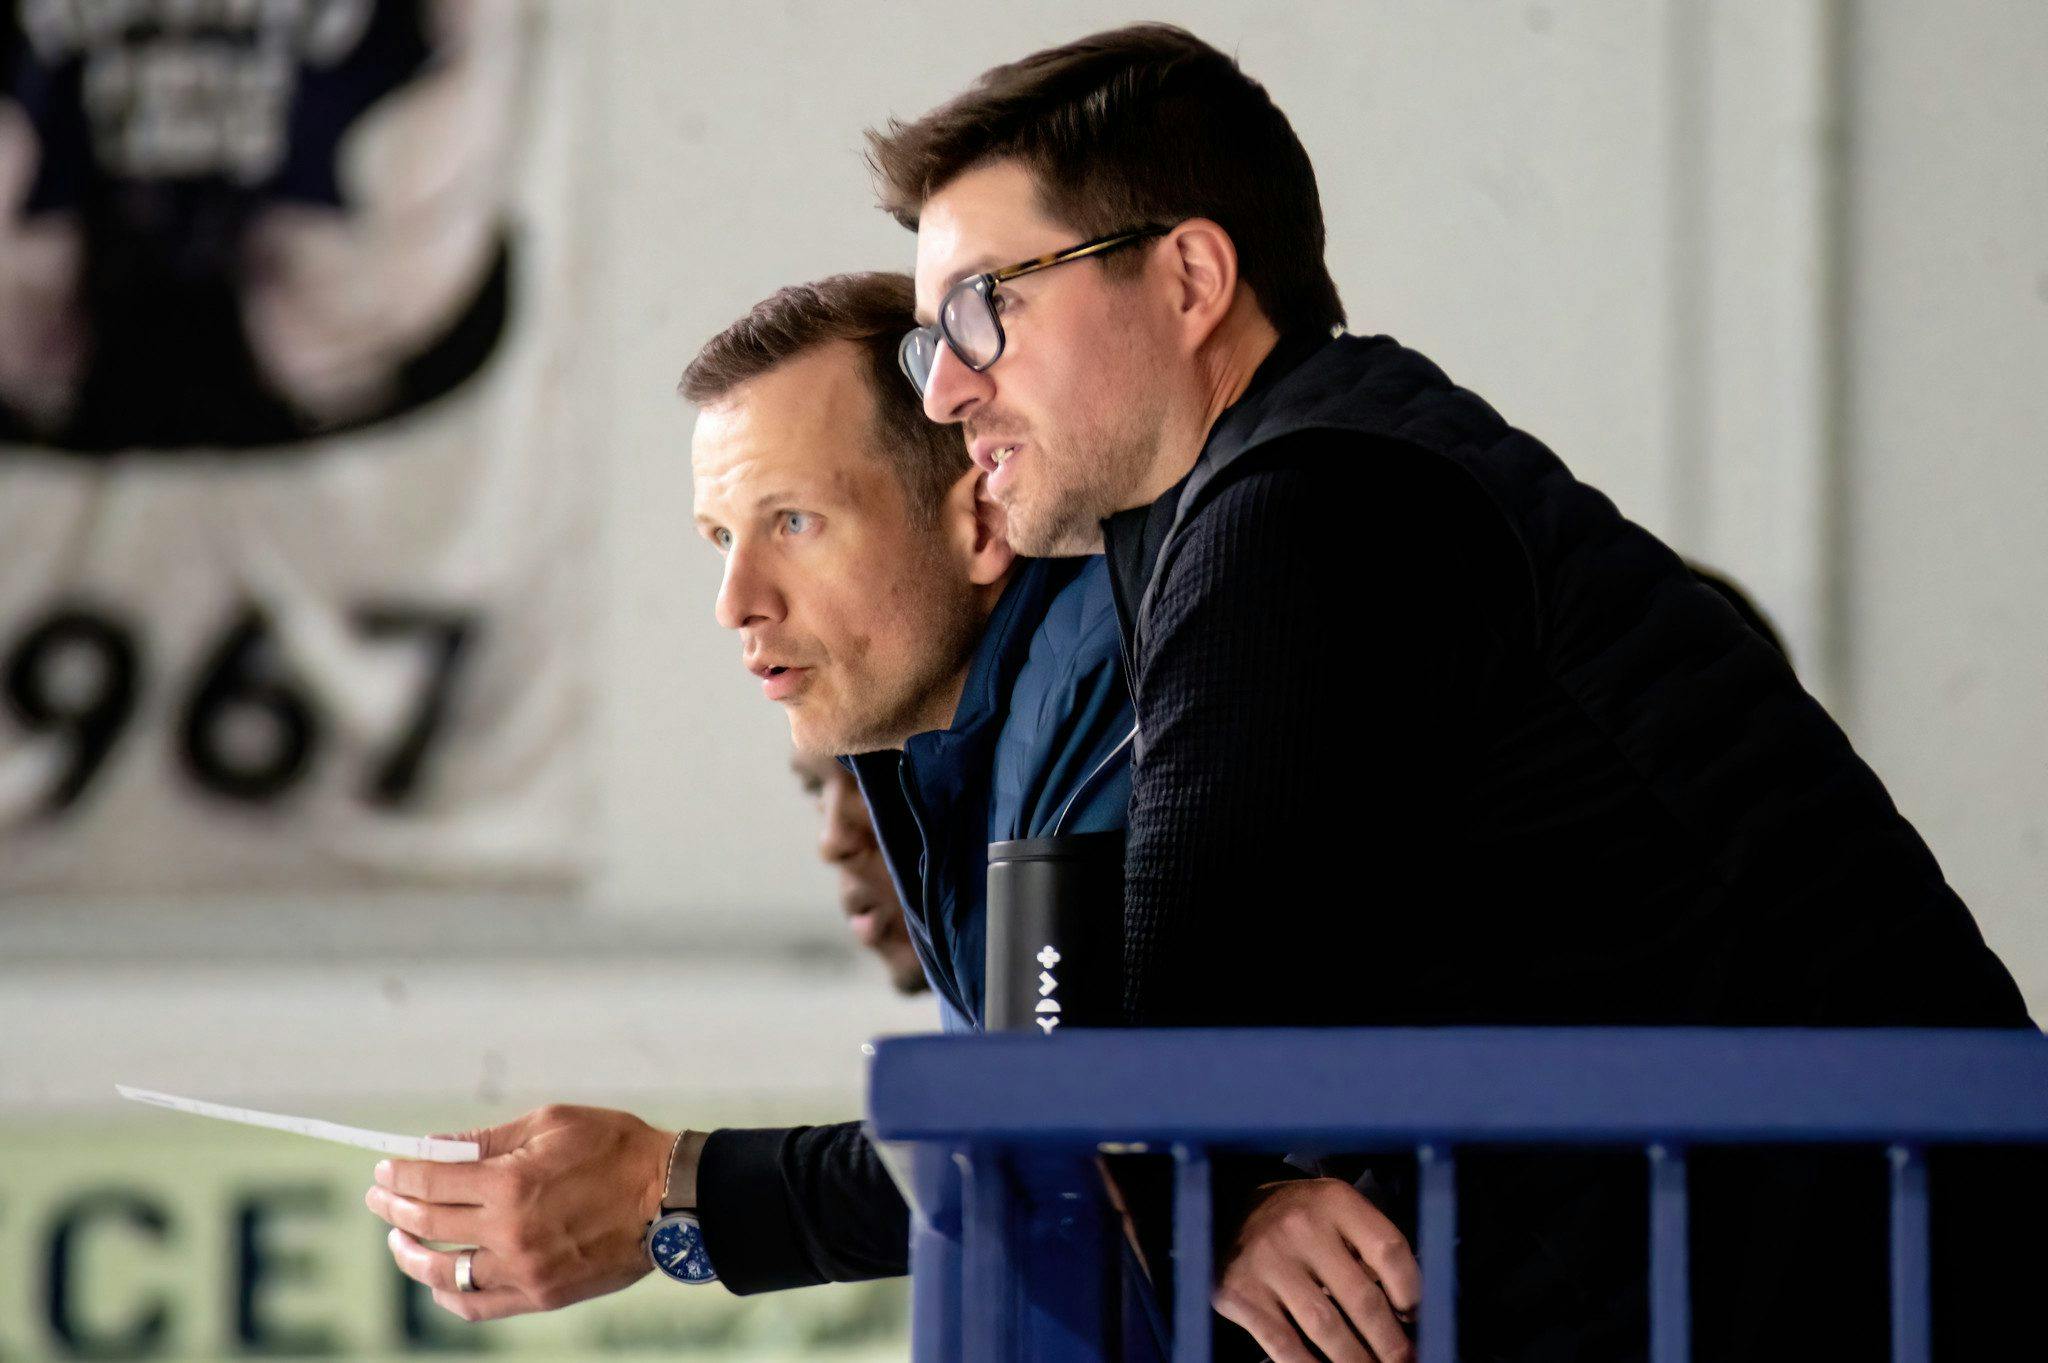 Report: Jason Spezza tendered resignation from Toronto Maple Leafs following Kyle Dubas departure